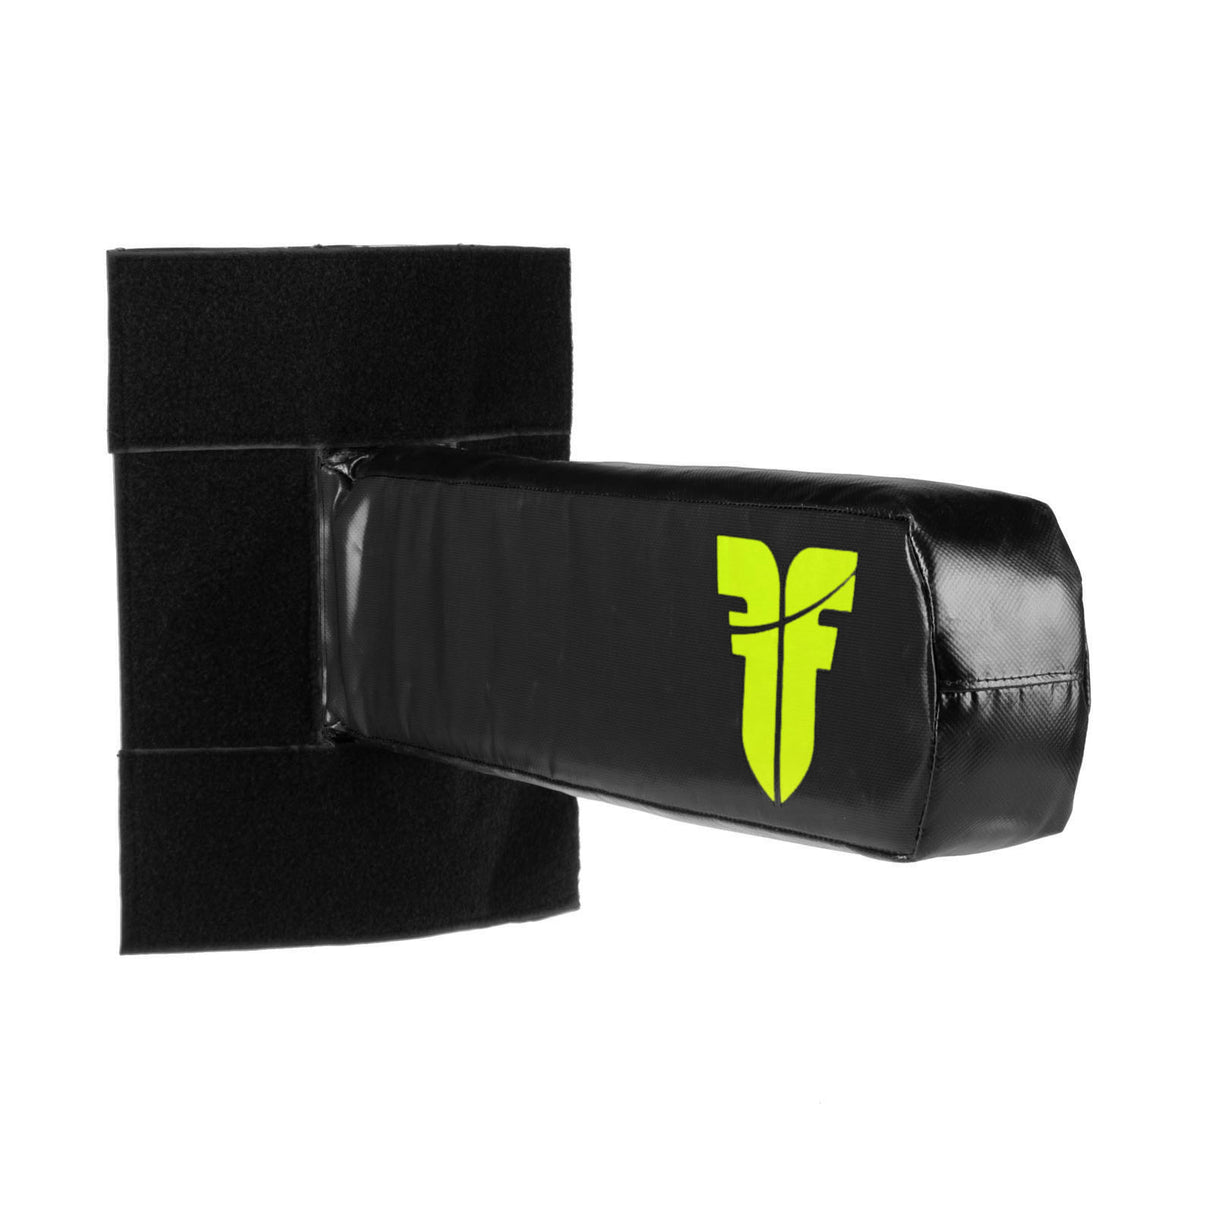 Fighter Arm Target L pour Power Wall - noir/jaune fluo, FPWS-09-BY